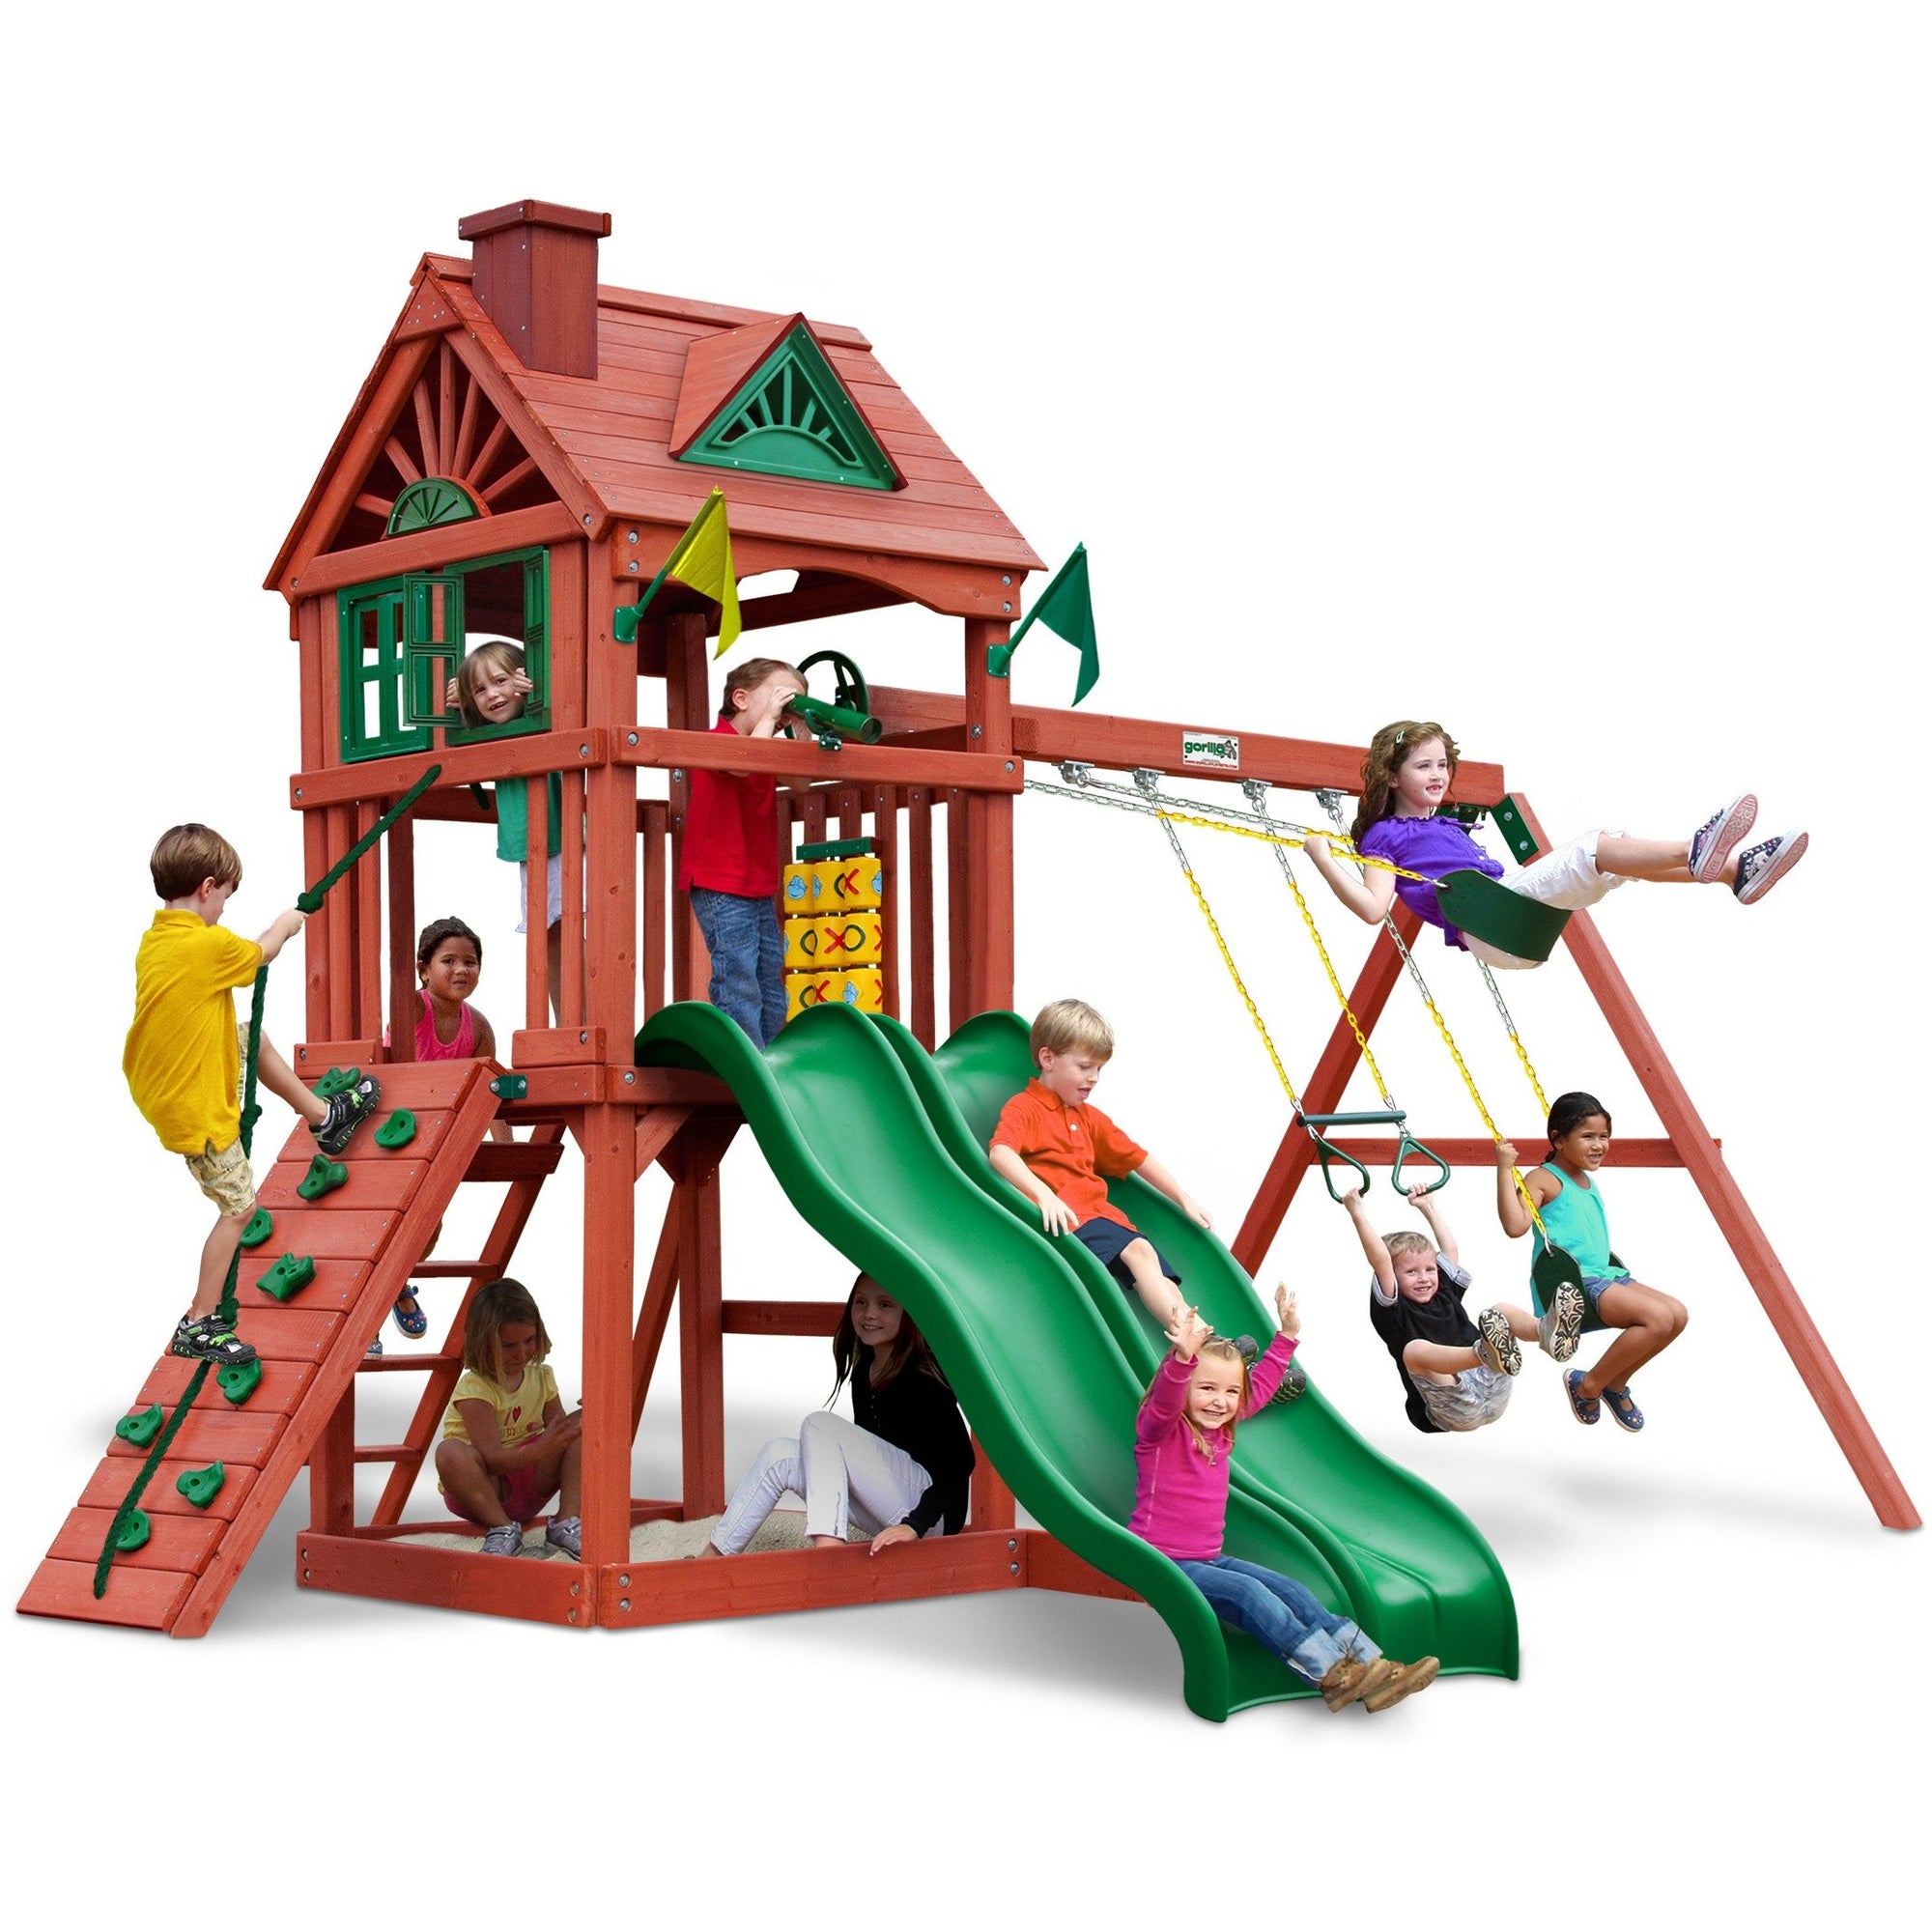 Double Down Gorilla Playset 01-0036 - Swings and More